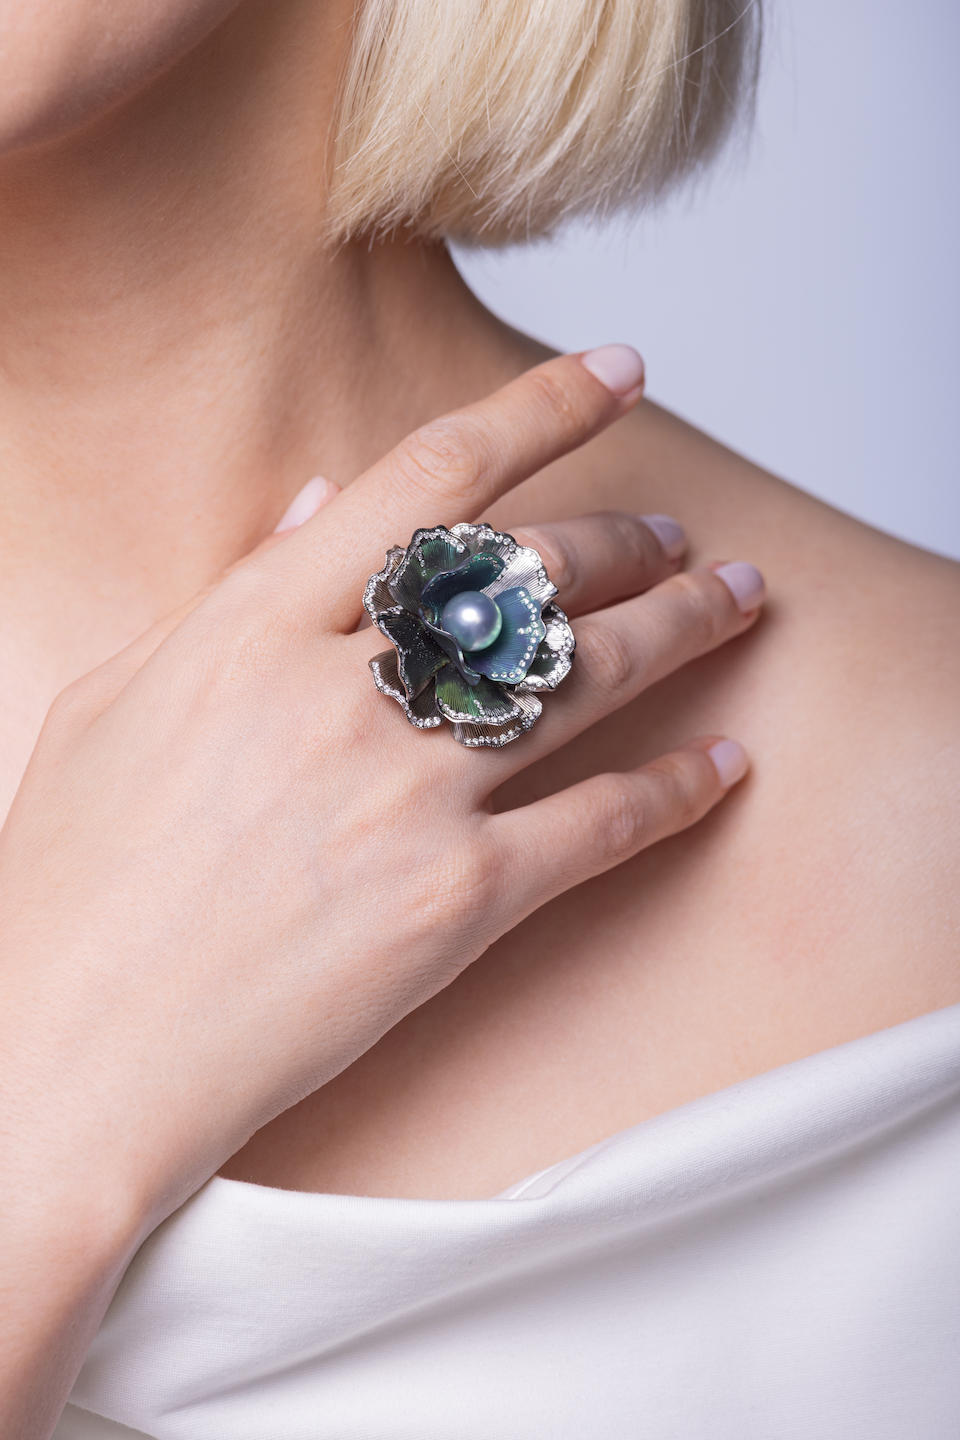 TITANINUM, CULTURED PEARL AND DIAMOND 'FLOWER' RING - Image 5 of 6